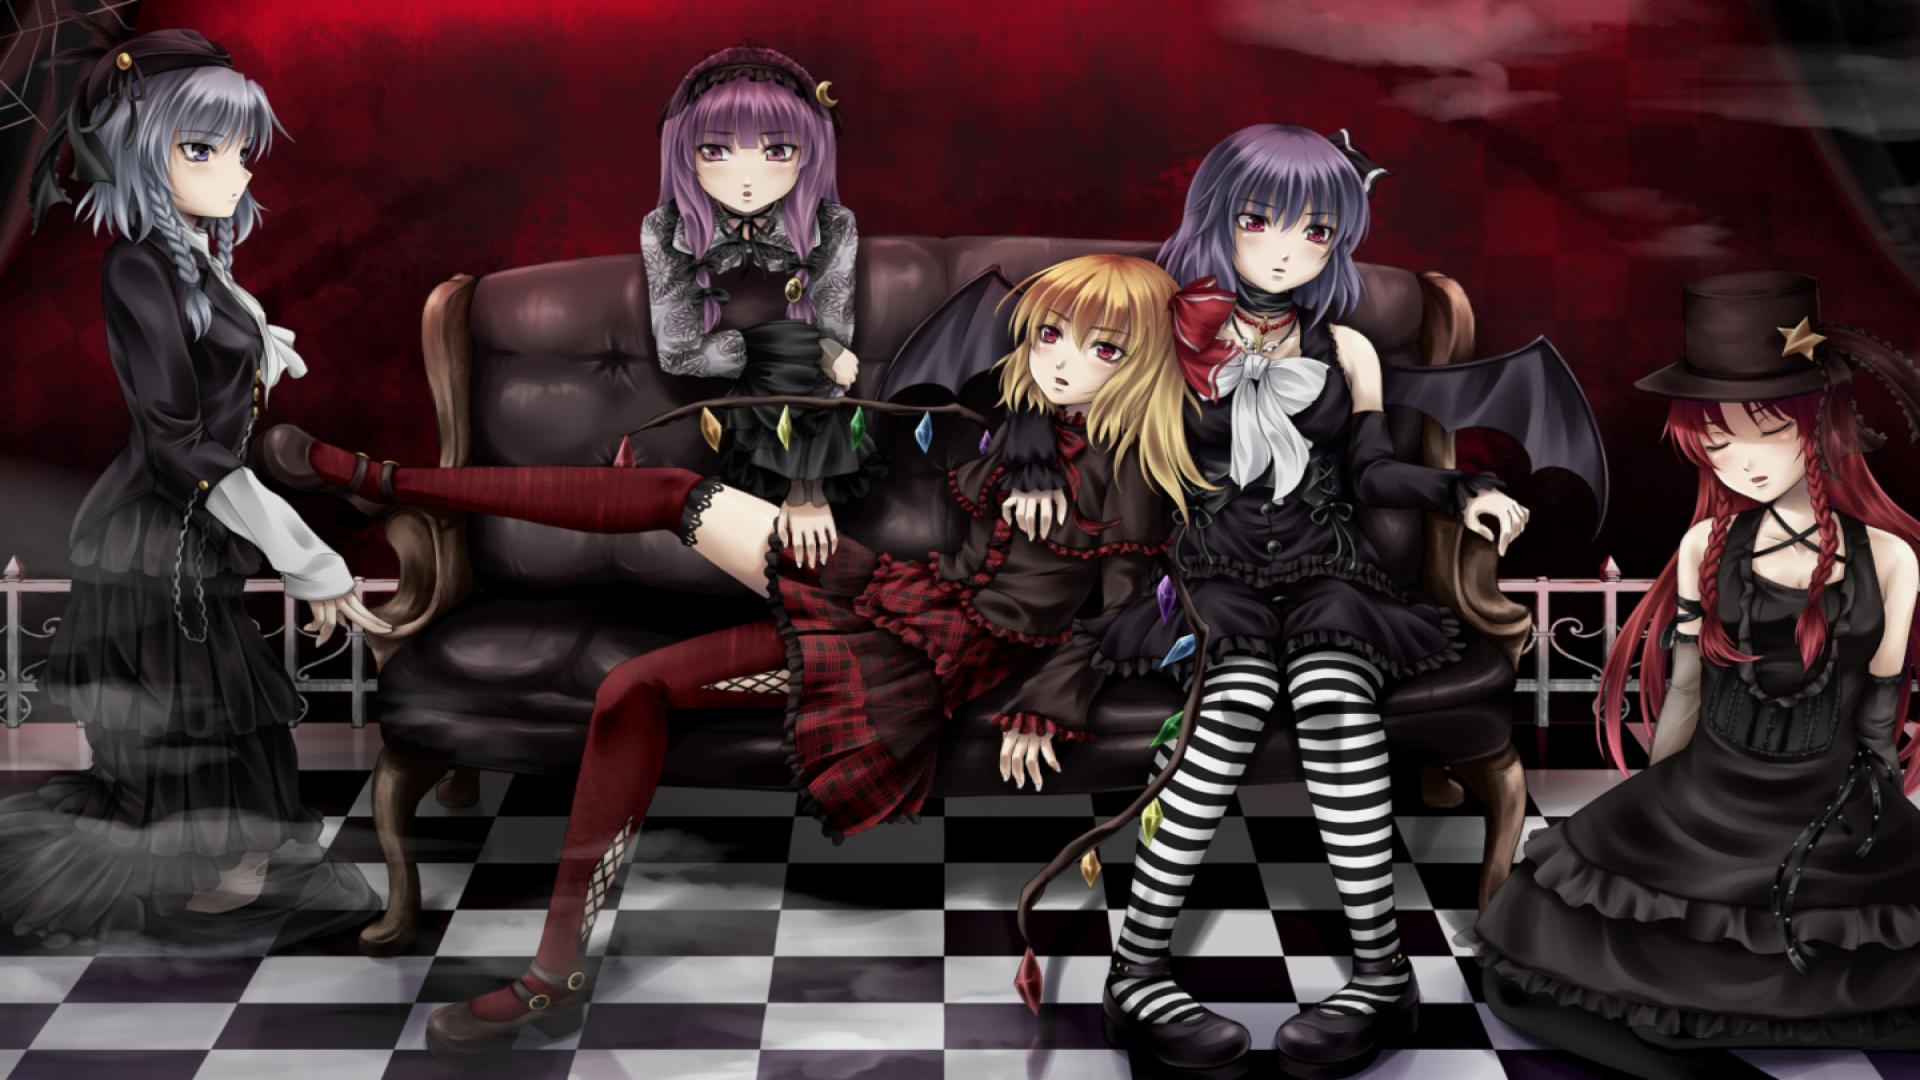 Free Download Gothic Anime Hd Backgrounds X For Your Desktop Mobile Tablet